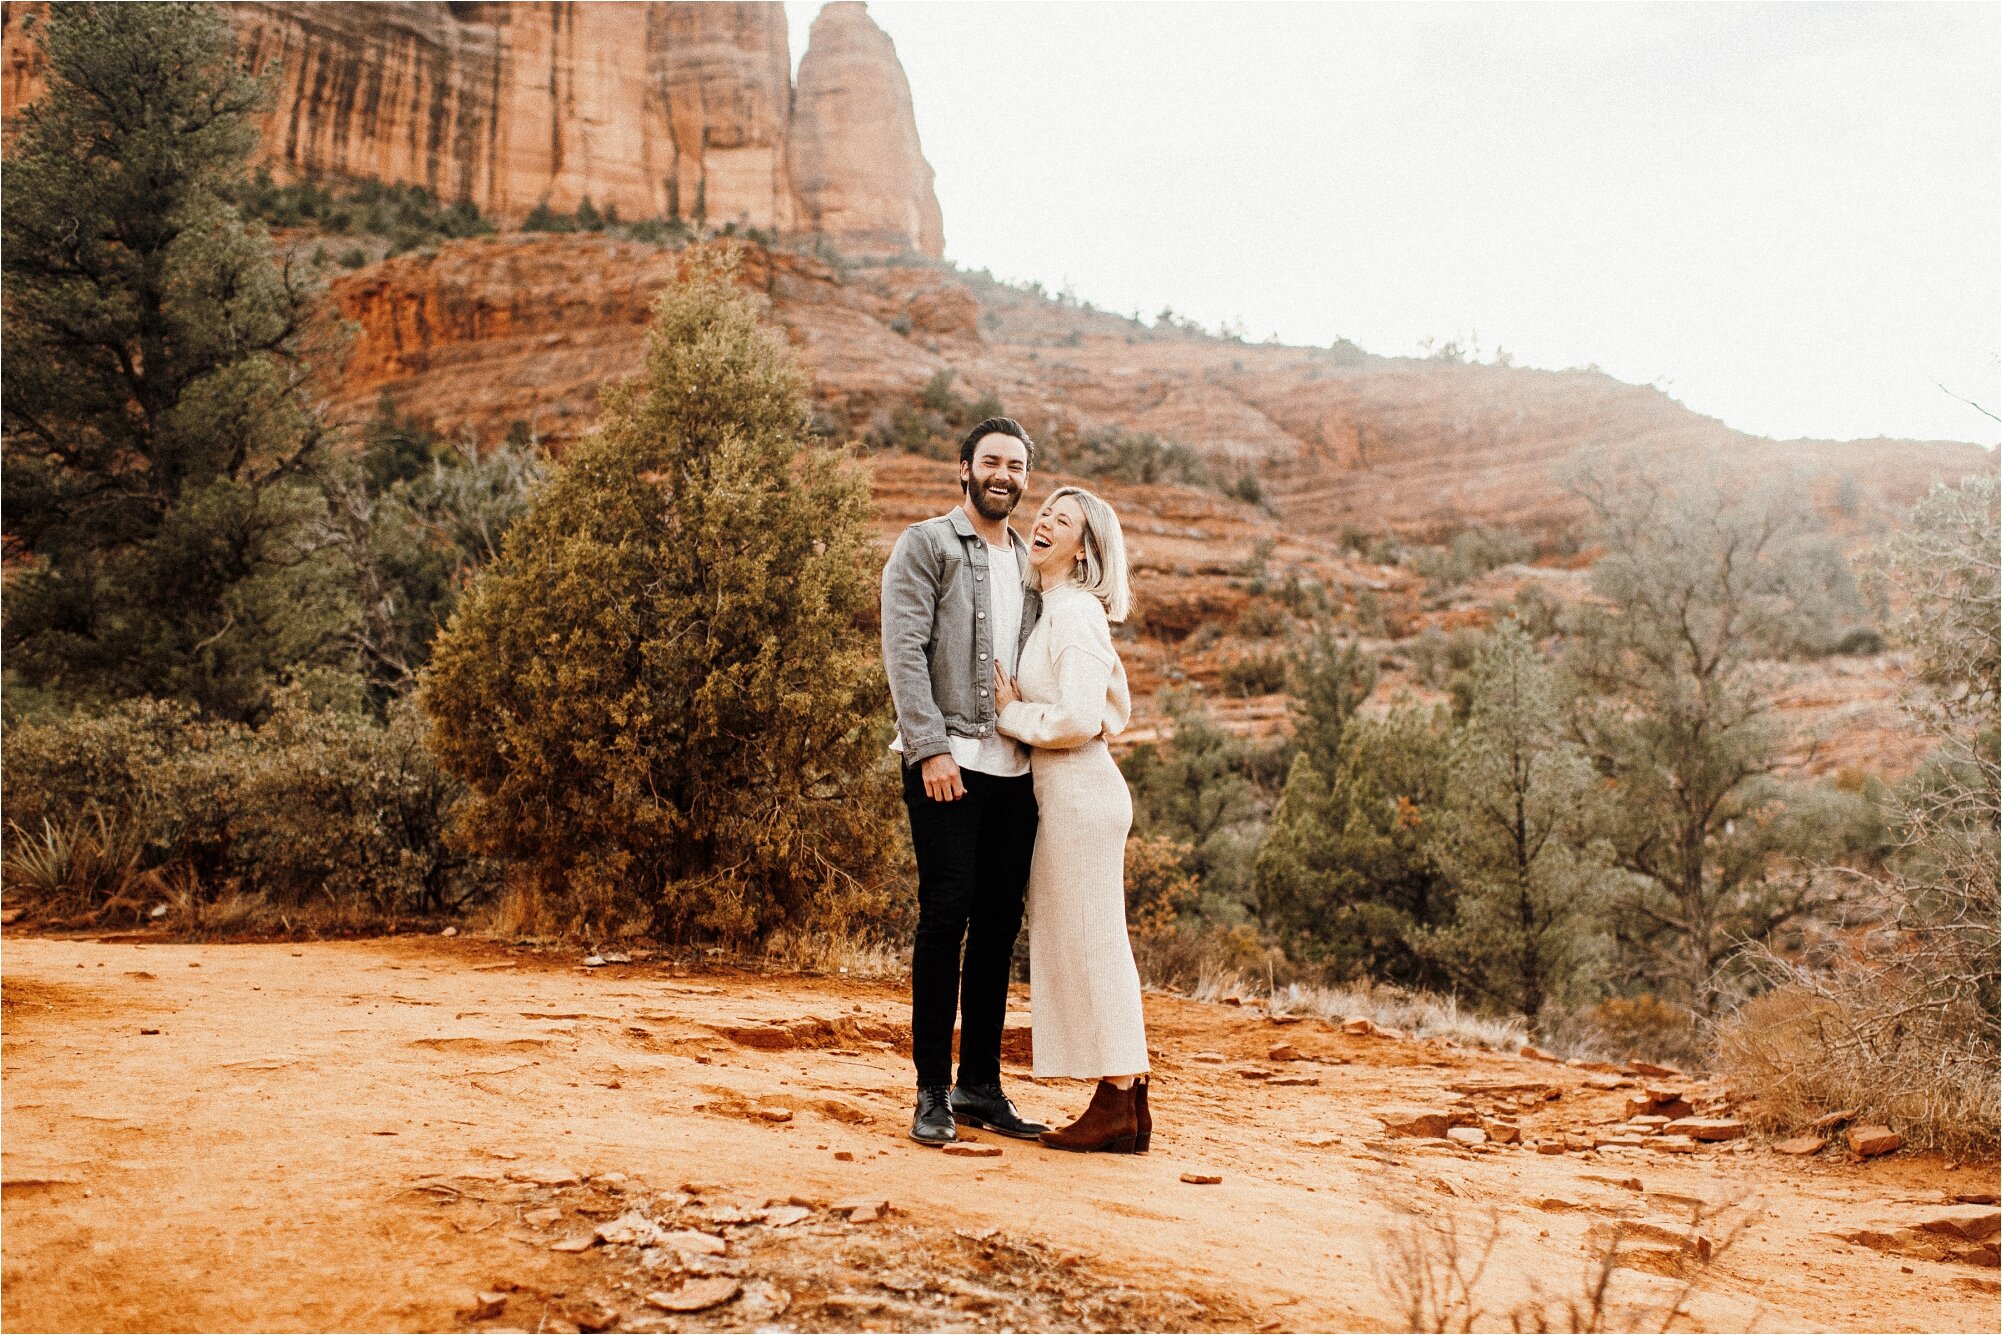  engagement photos in arizona outfit inspiration for engaged couple 